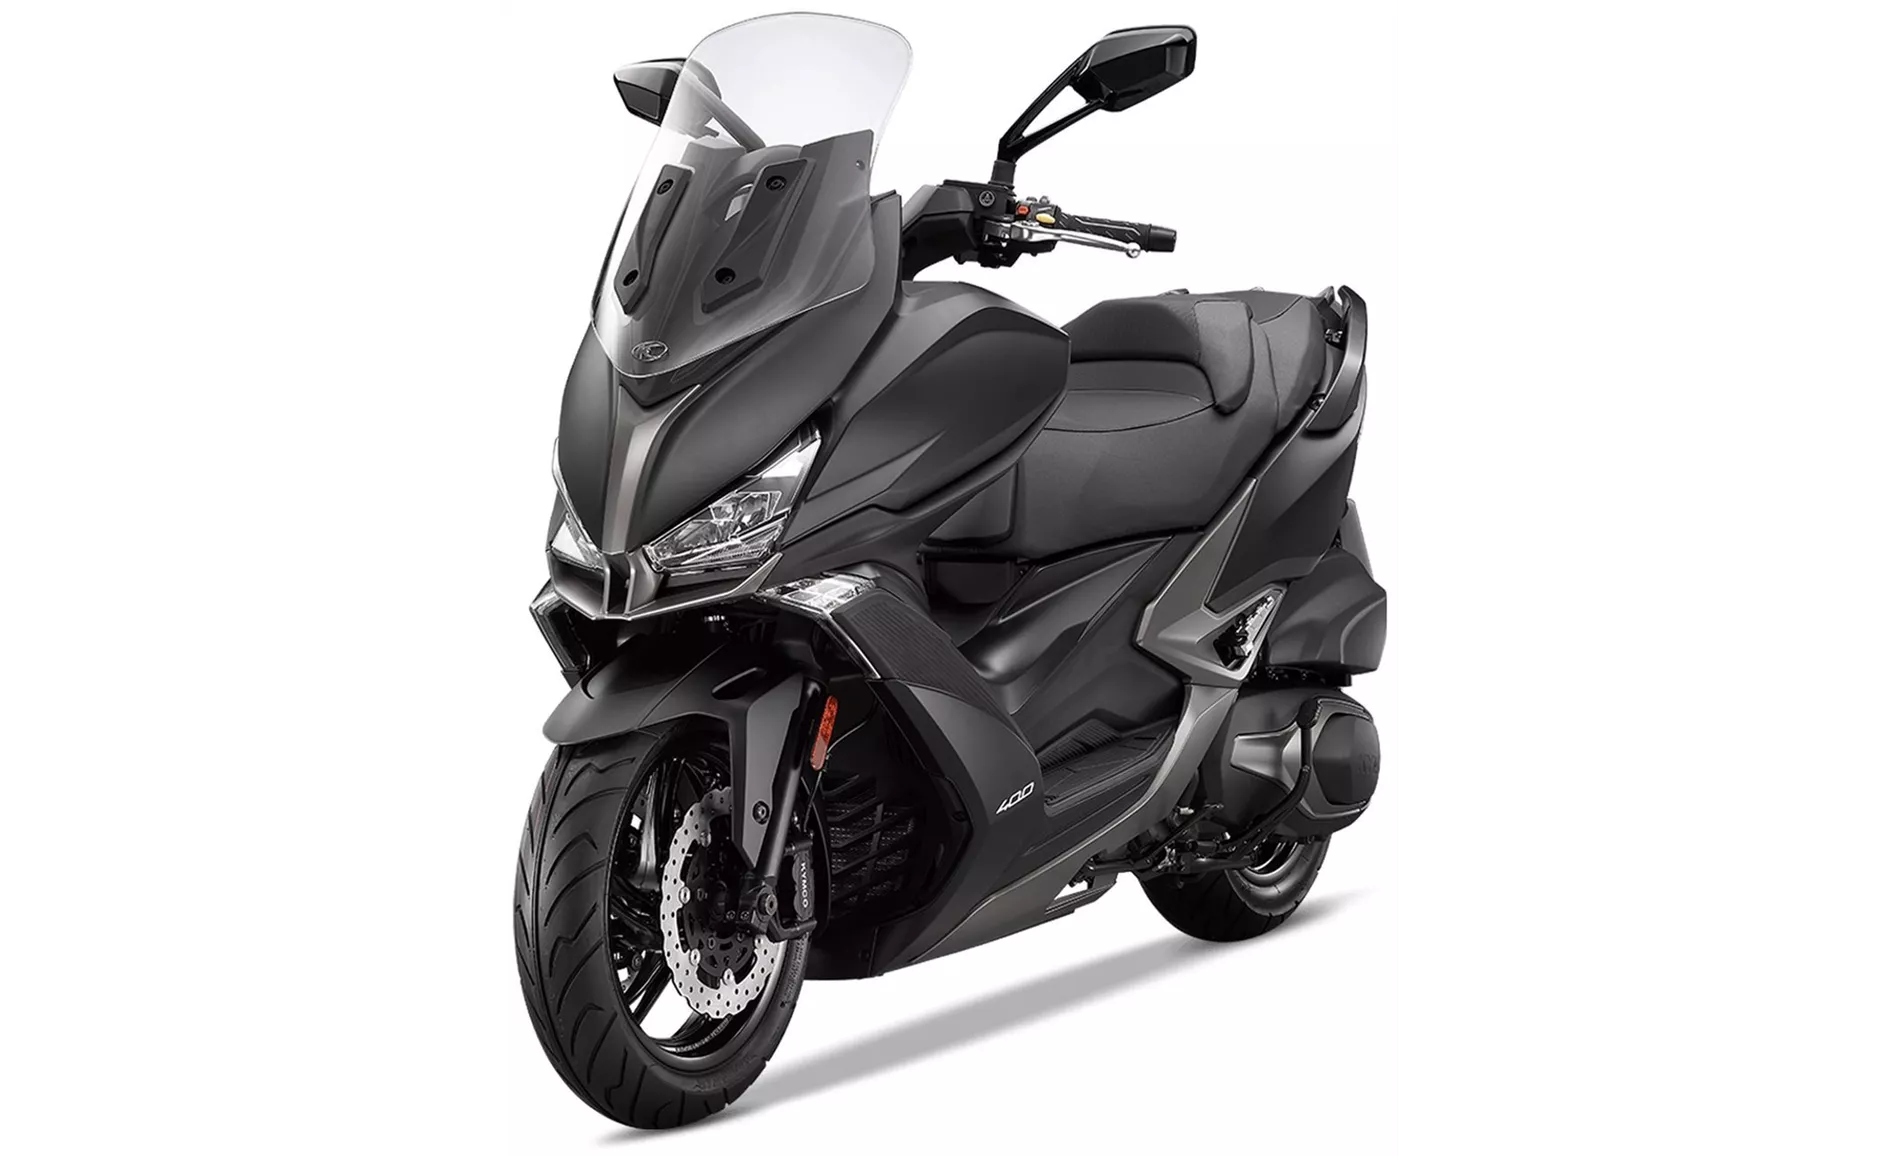 Kymco Xciting S 400i ABS 2020